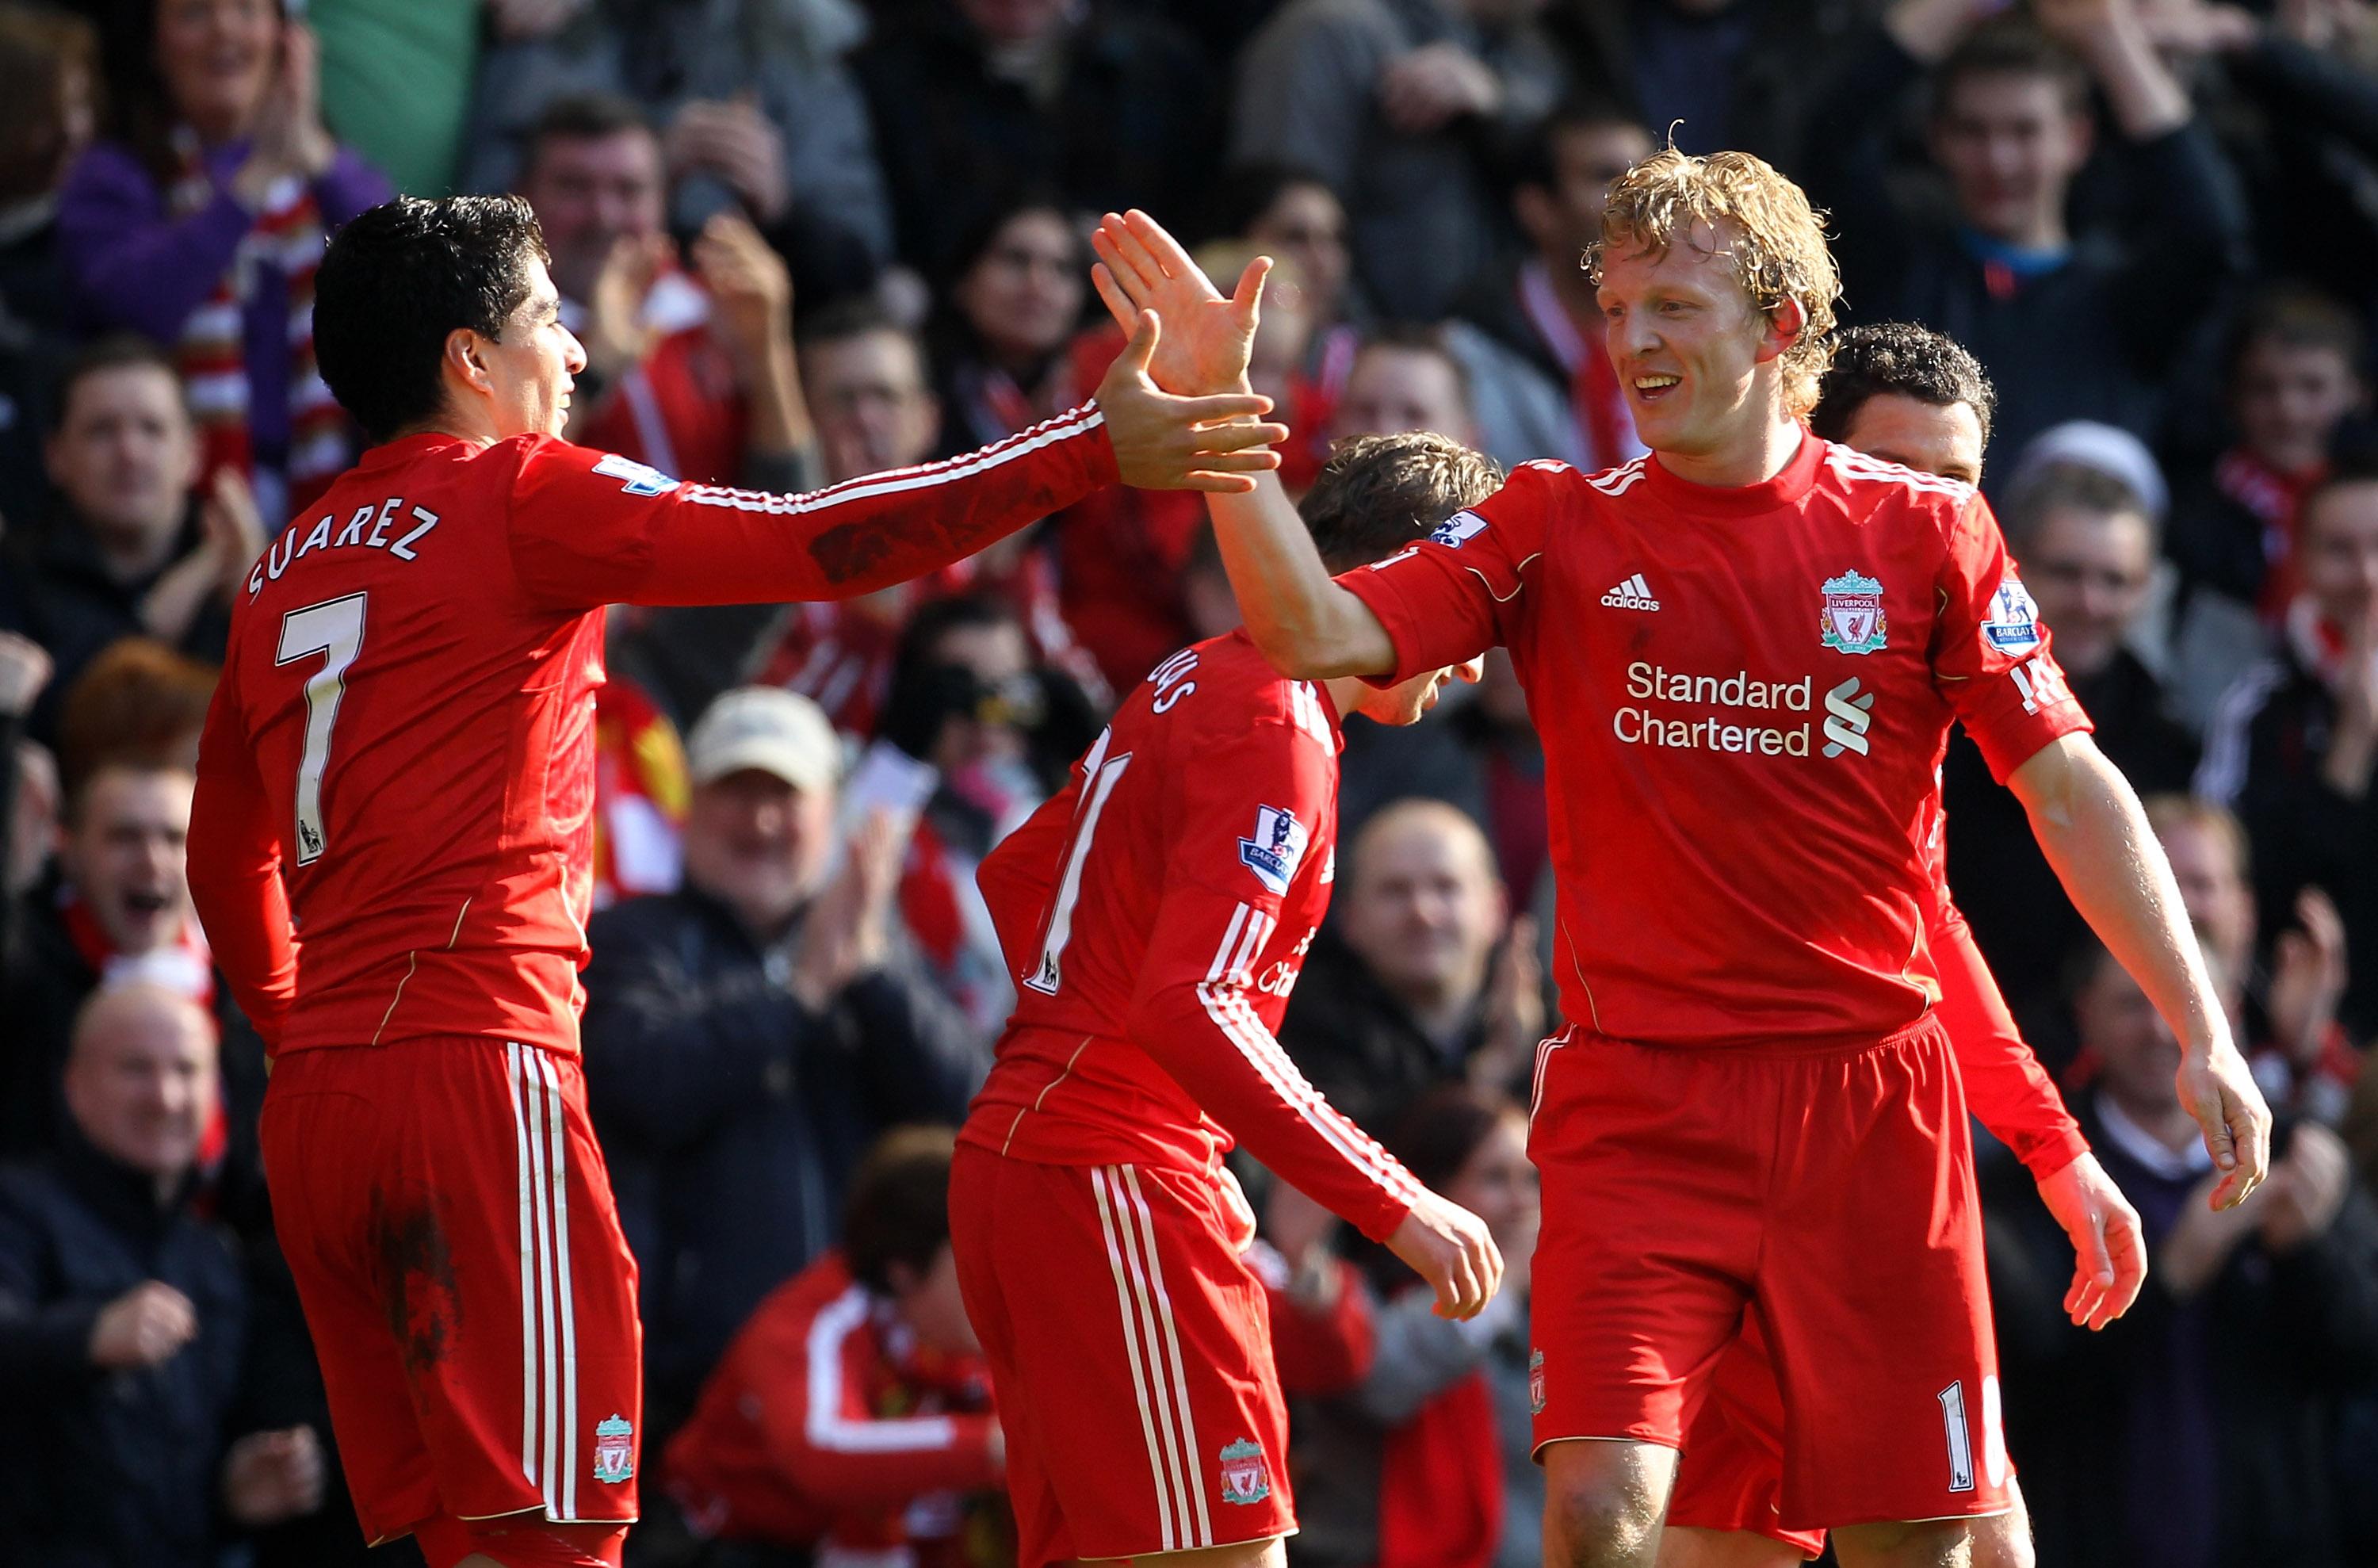 LIVERPOOL, ENGLAND - MARCH 06:  Dirk Kuyt of Liverpool celebrates scoring the opening goal with team mate Luis Suarez during the Barclays Premier League match between Liverpool and Manchester United at Anfield on March 6, 2011 in Liverpool, England.  (Pho